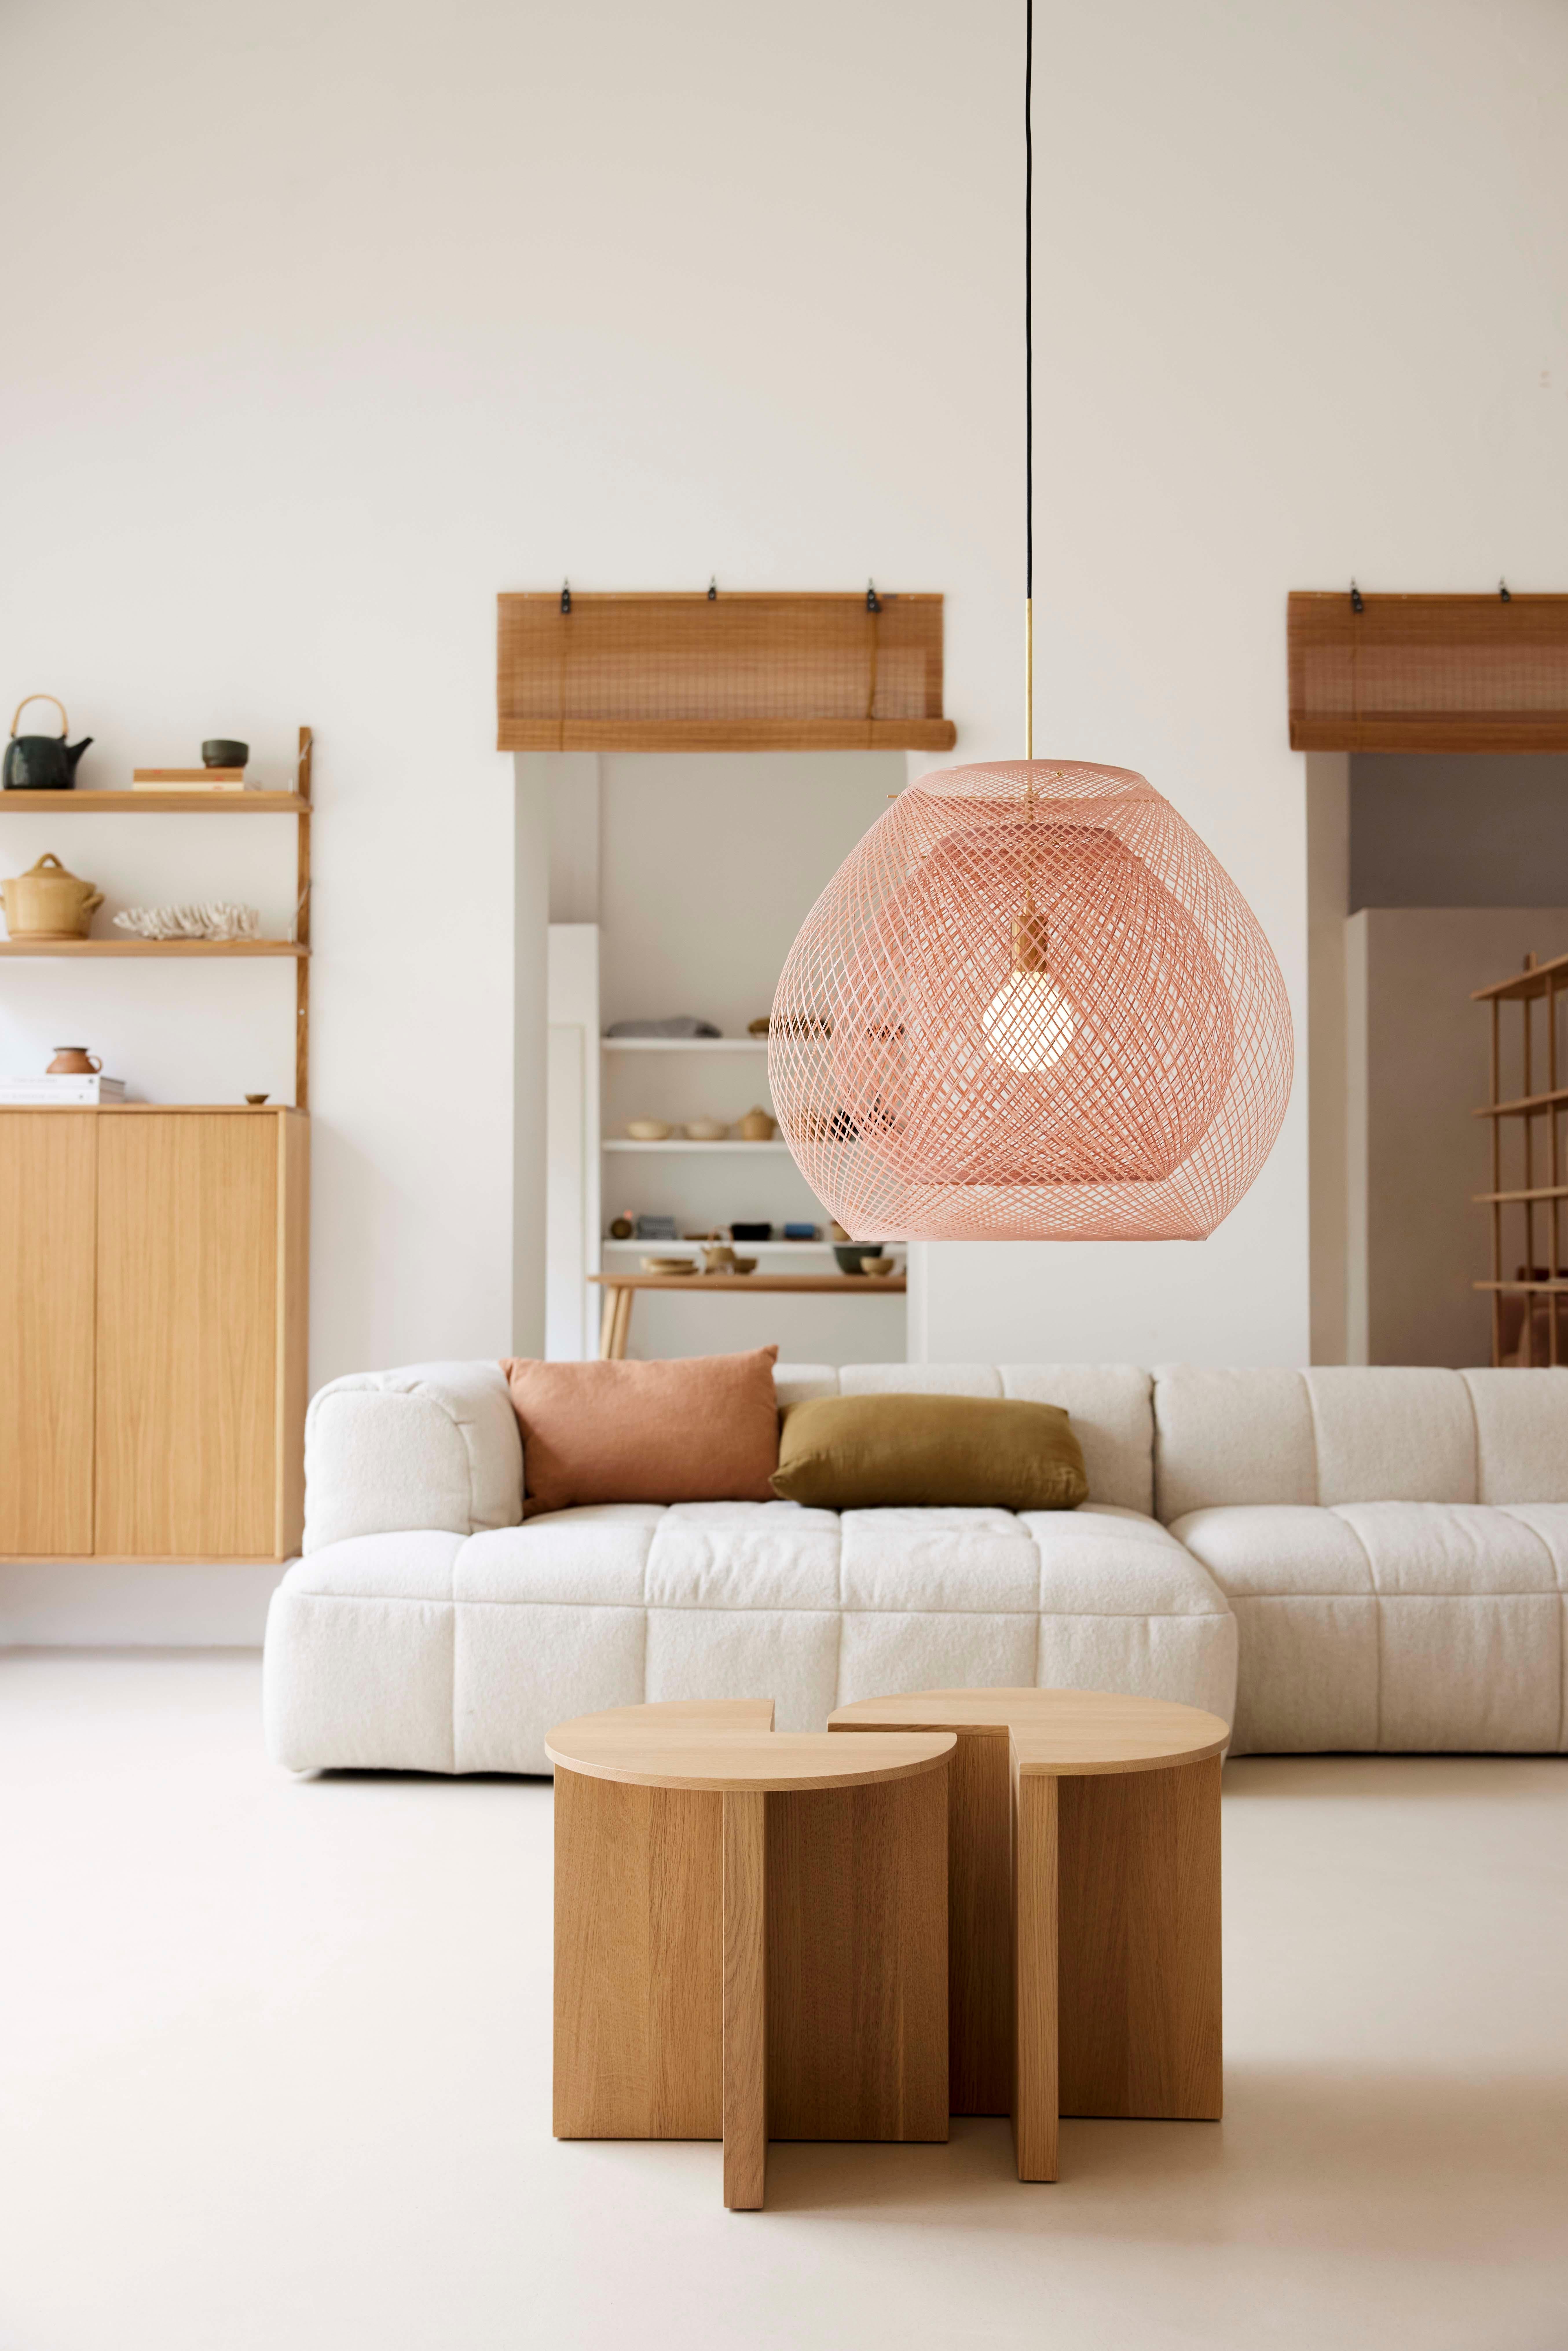 Medium Pink Moon Twilight Set pendant lamp by Atelier Robotiq
Dimensions: D 55 x H 49 cm
Materials: Resin-impregnated industrial fiber.
Available in different colors: Golden Hour, Pink Moon, and Indigo Night.
Also available in single